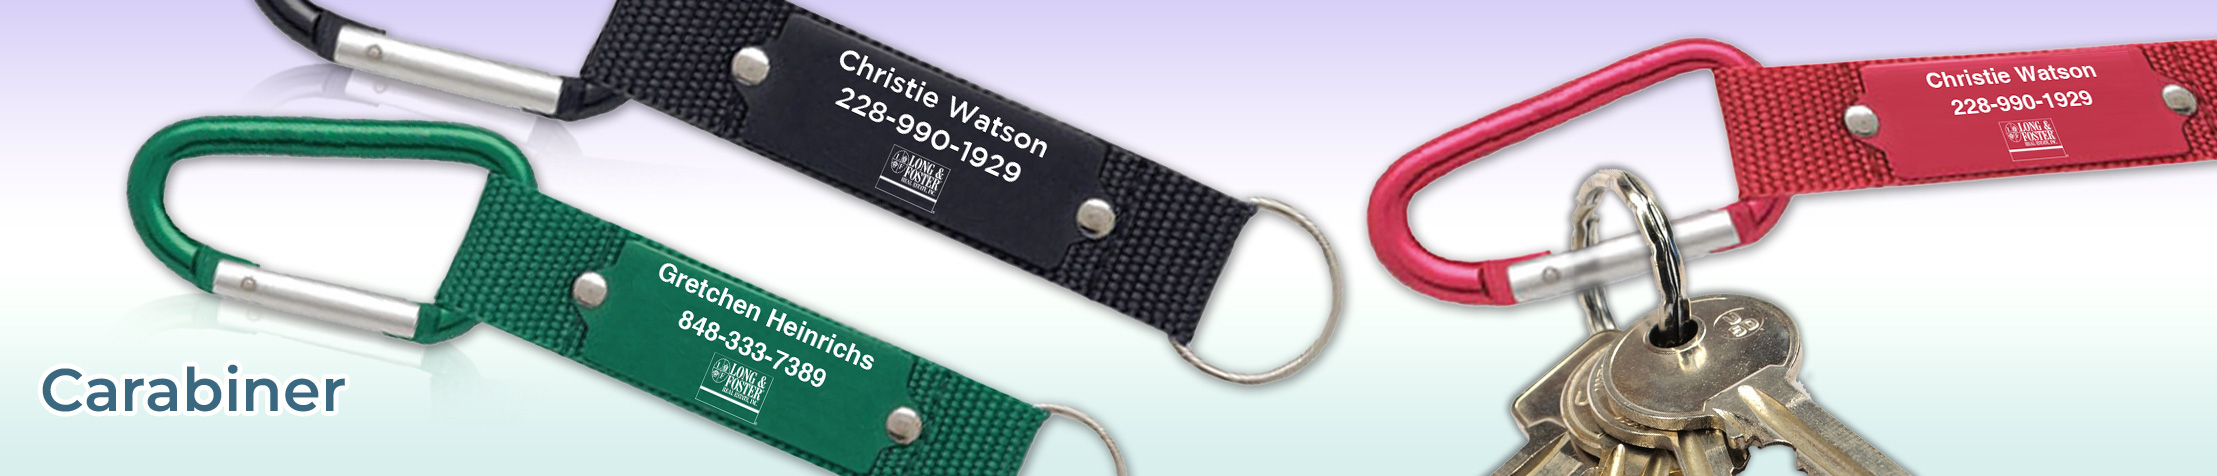 Long and Foster Real Estate Carabiner - Long and Foster  personalized realtor promotional products | BestPrintBuy.com